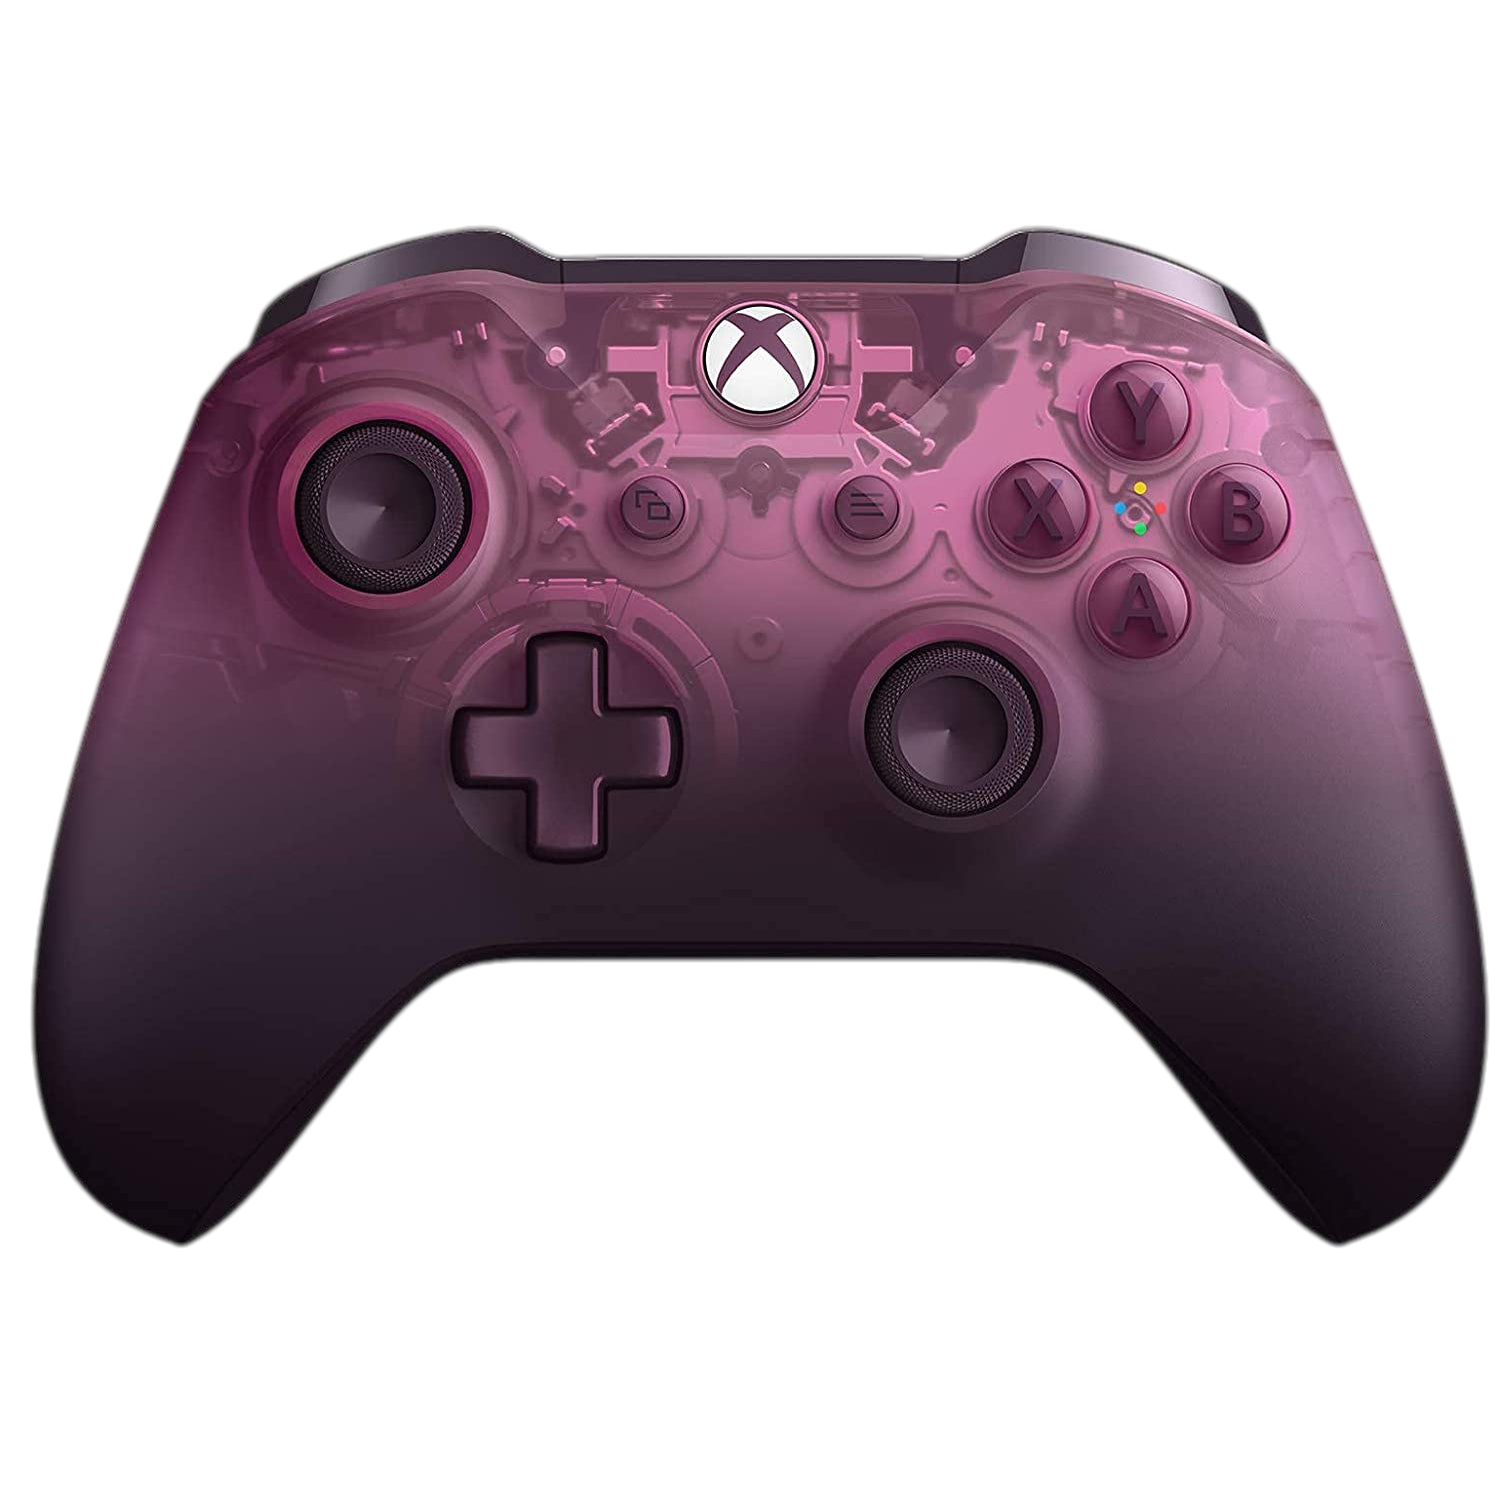 Microsoft_20Official_20Xbox_20Controller_20Phantom_20Magenta_20Limited_20Edition_2012_20Months_20Warranty_583f6ee8-b2a2-4c6b-8997-528cde3a7aa4